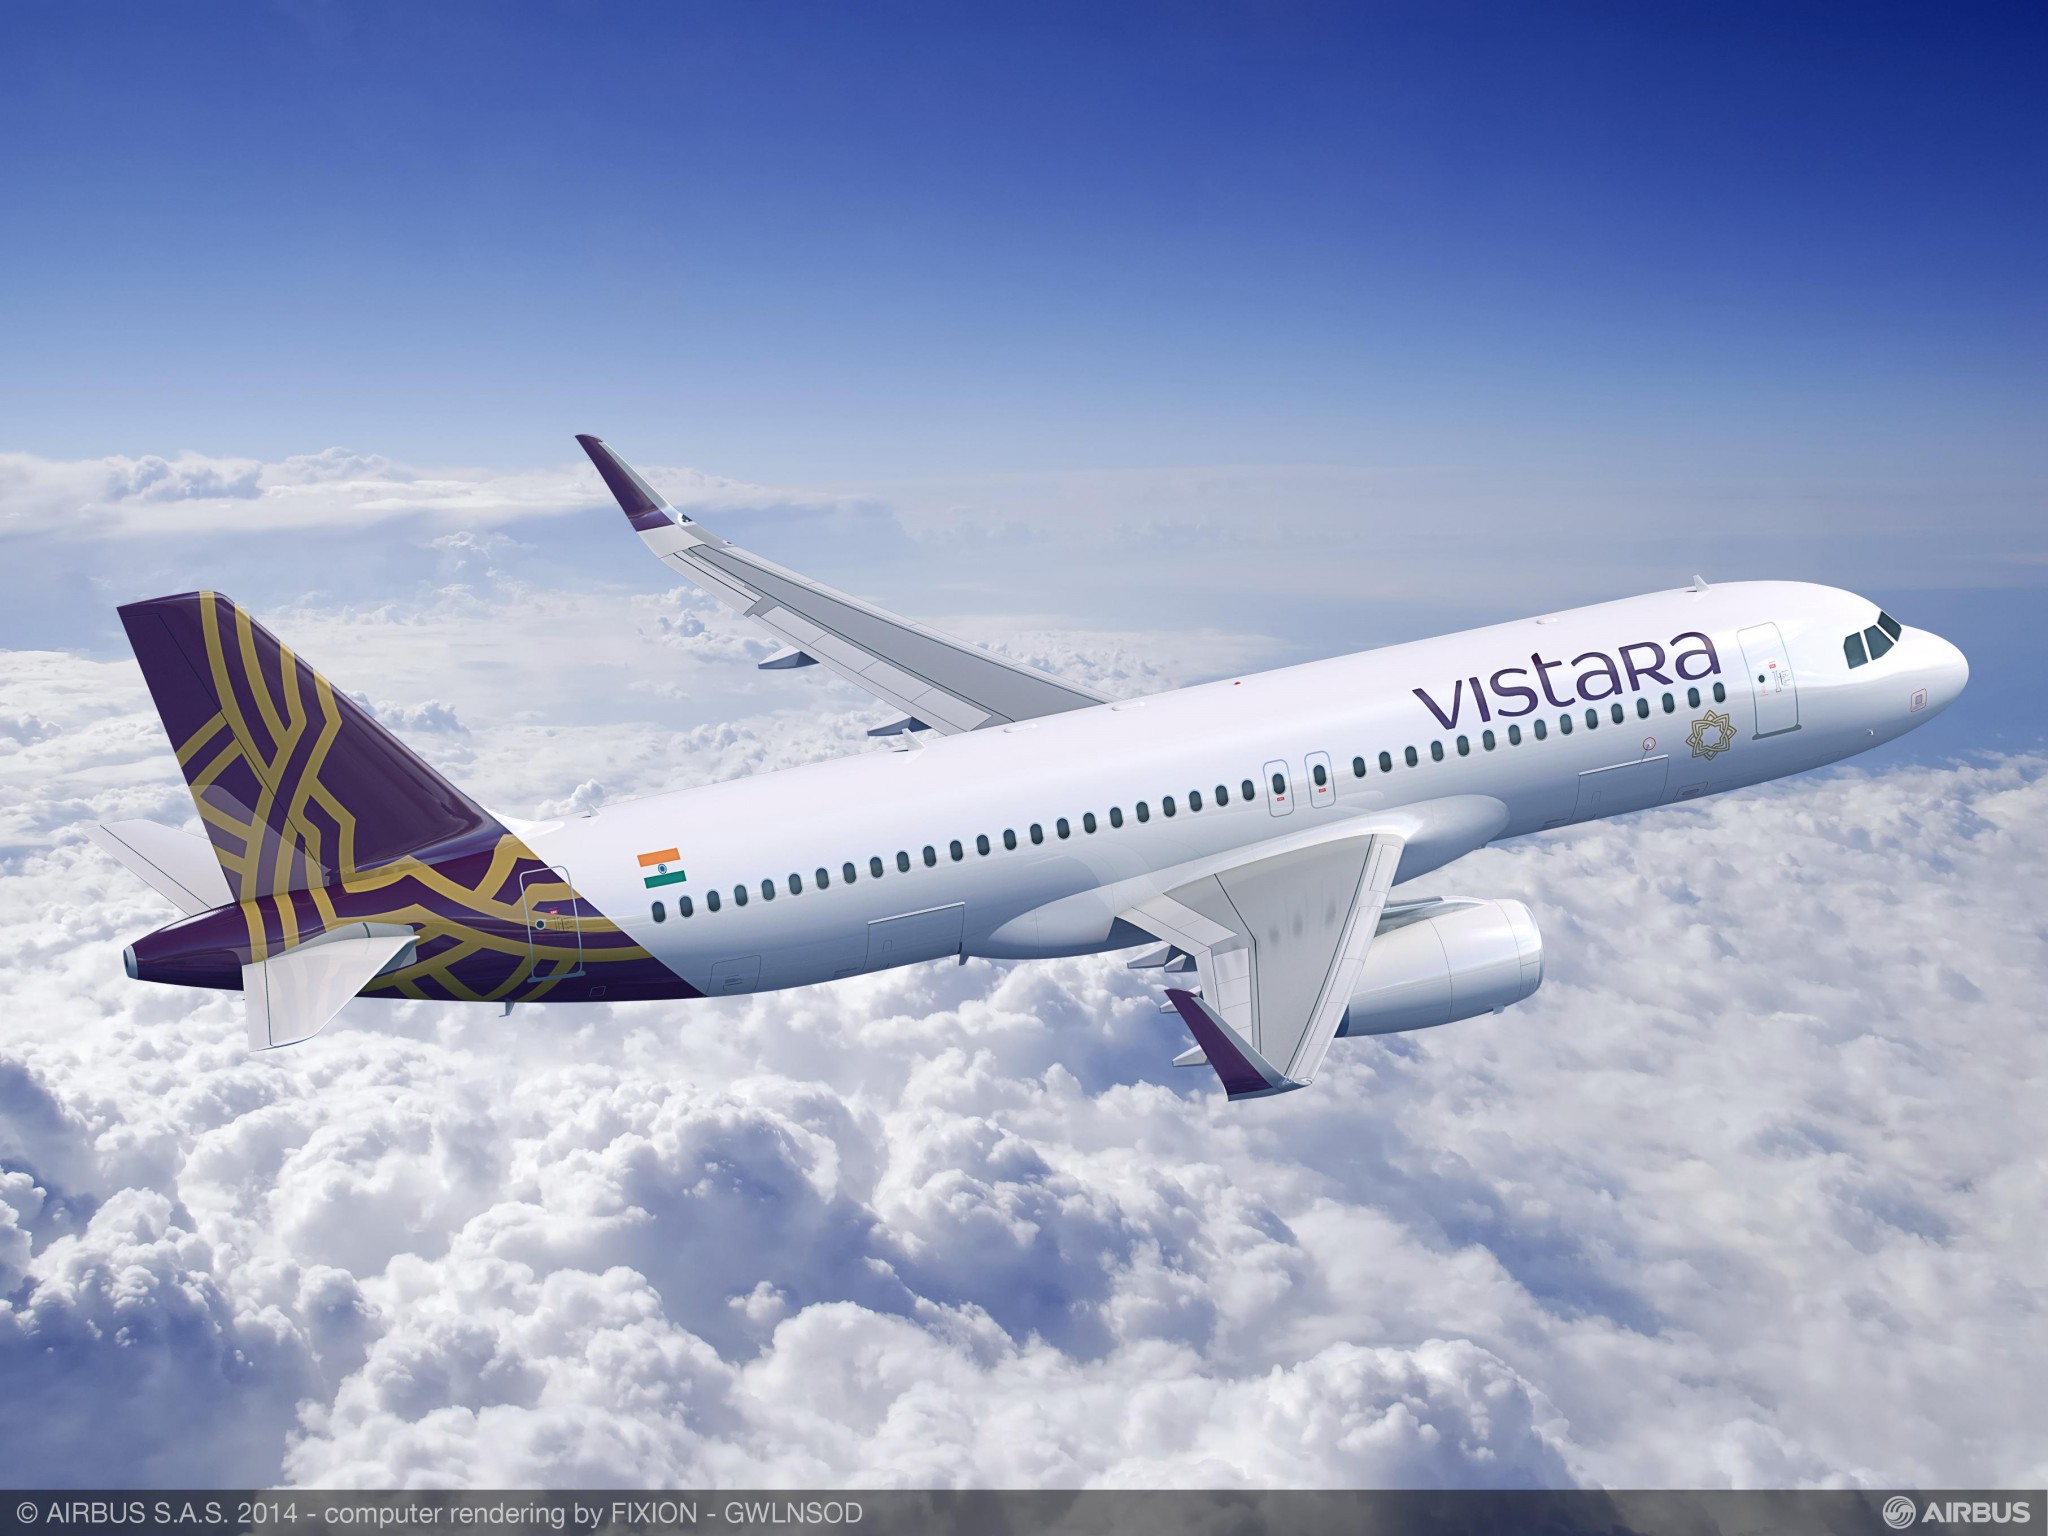 Vistara puts a hold on ordering new aircraft until after Air India merger